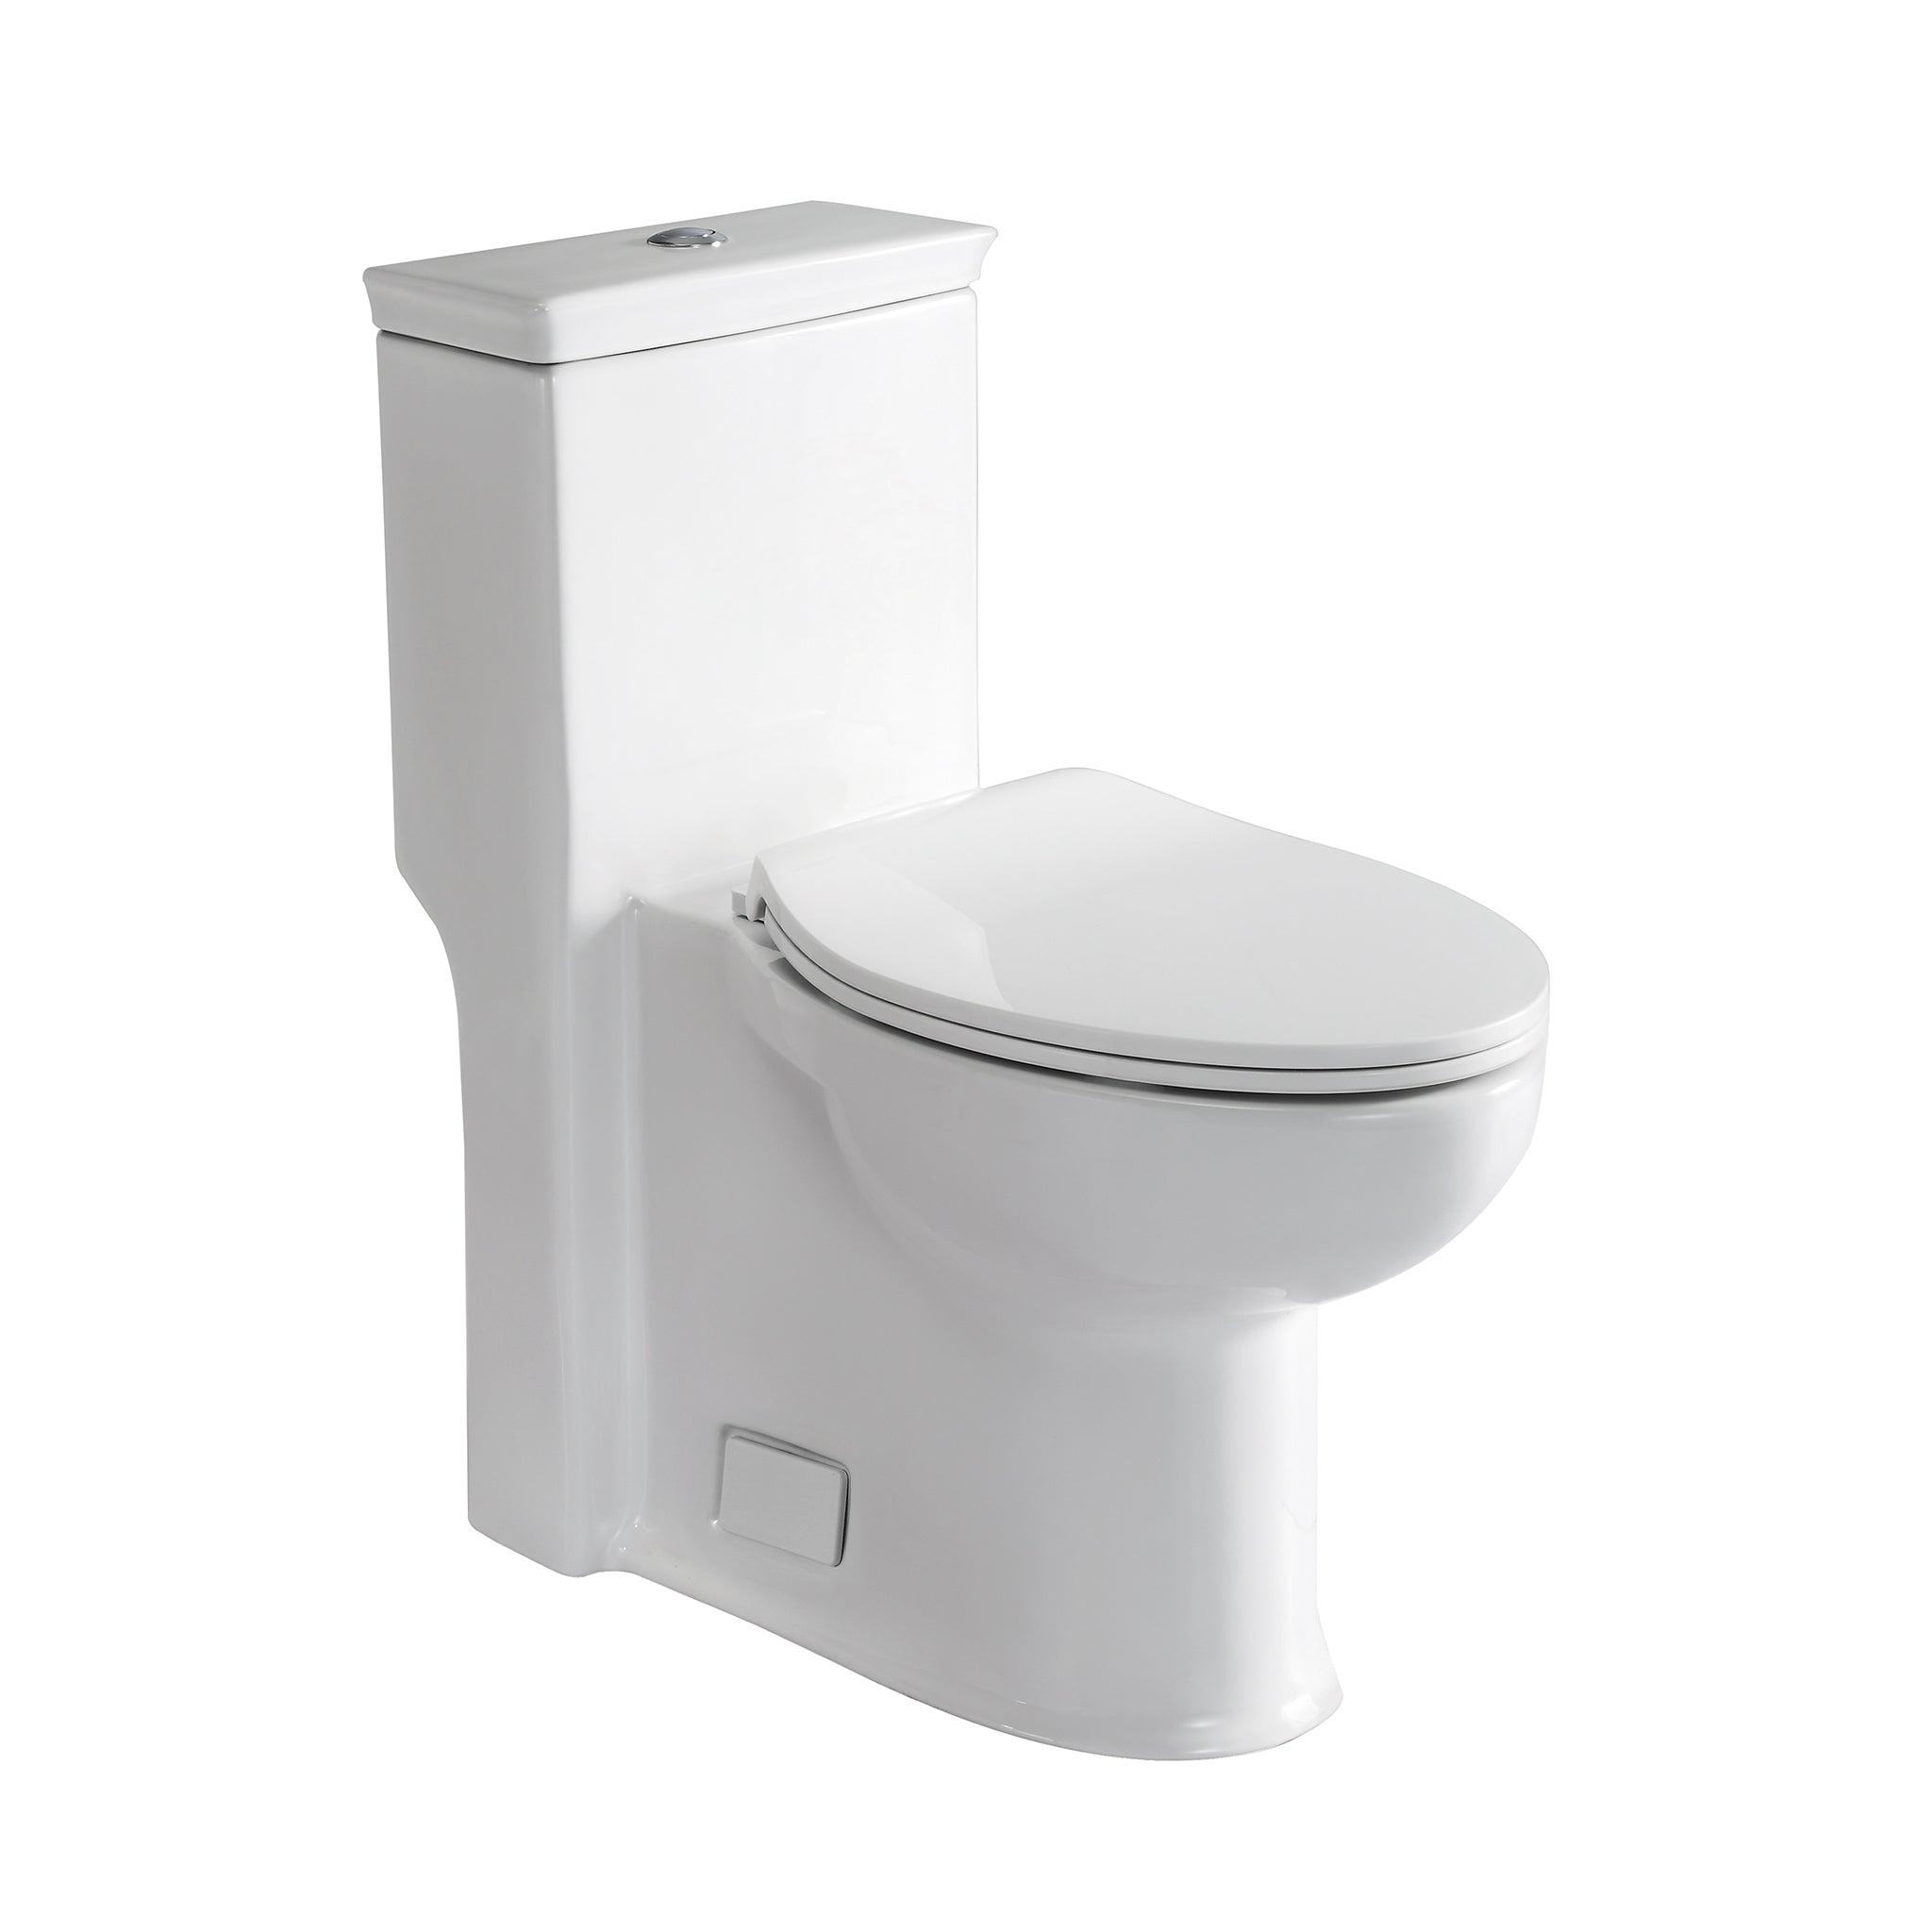 Eago TB 377 Elongated One Piece Single Flush Toilet With Soft Closing Seat